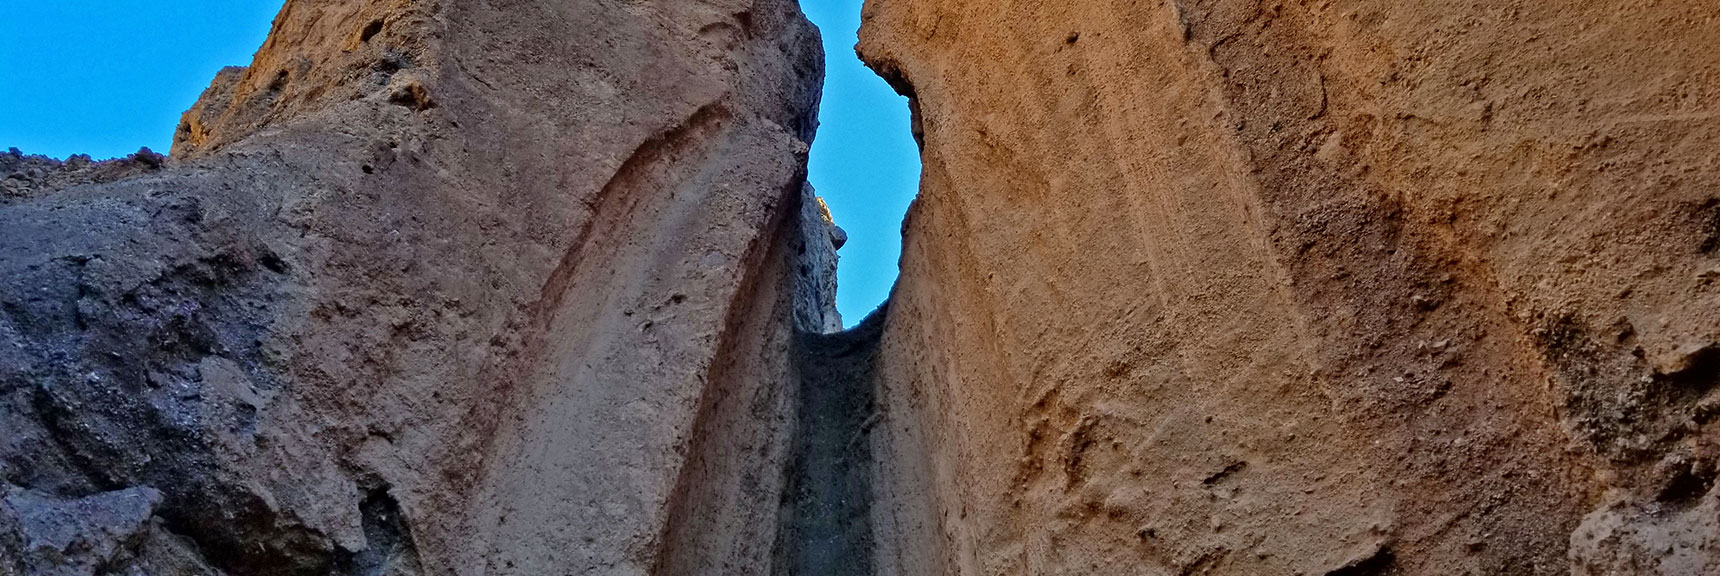 Looking Up the Dry Waterfall Alcove Above the Natural Bridge | Natural Bridge Canyon | Death Valley National Park, California